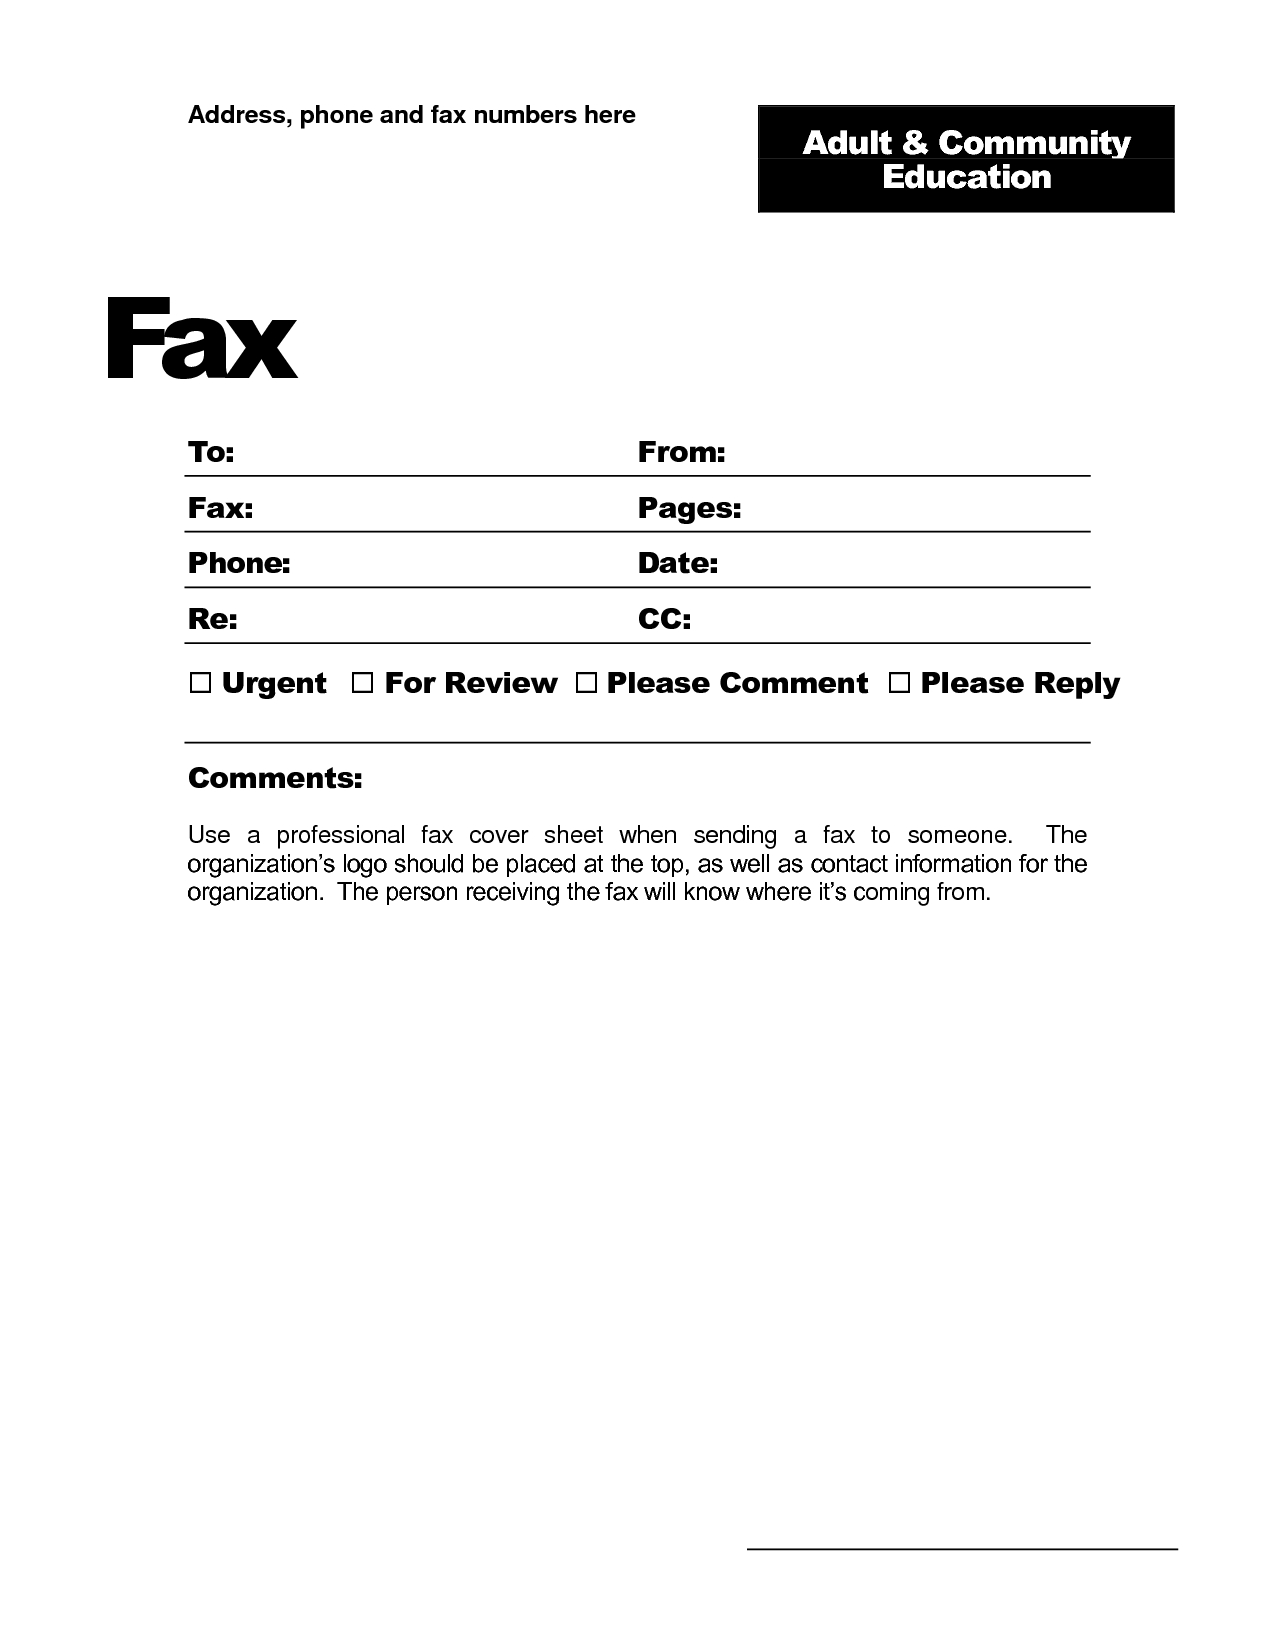 Fax Template Word 2010 - Free Download Regarding Fax Template Word 2010